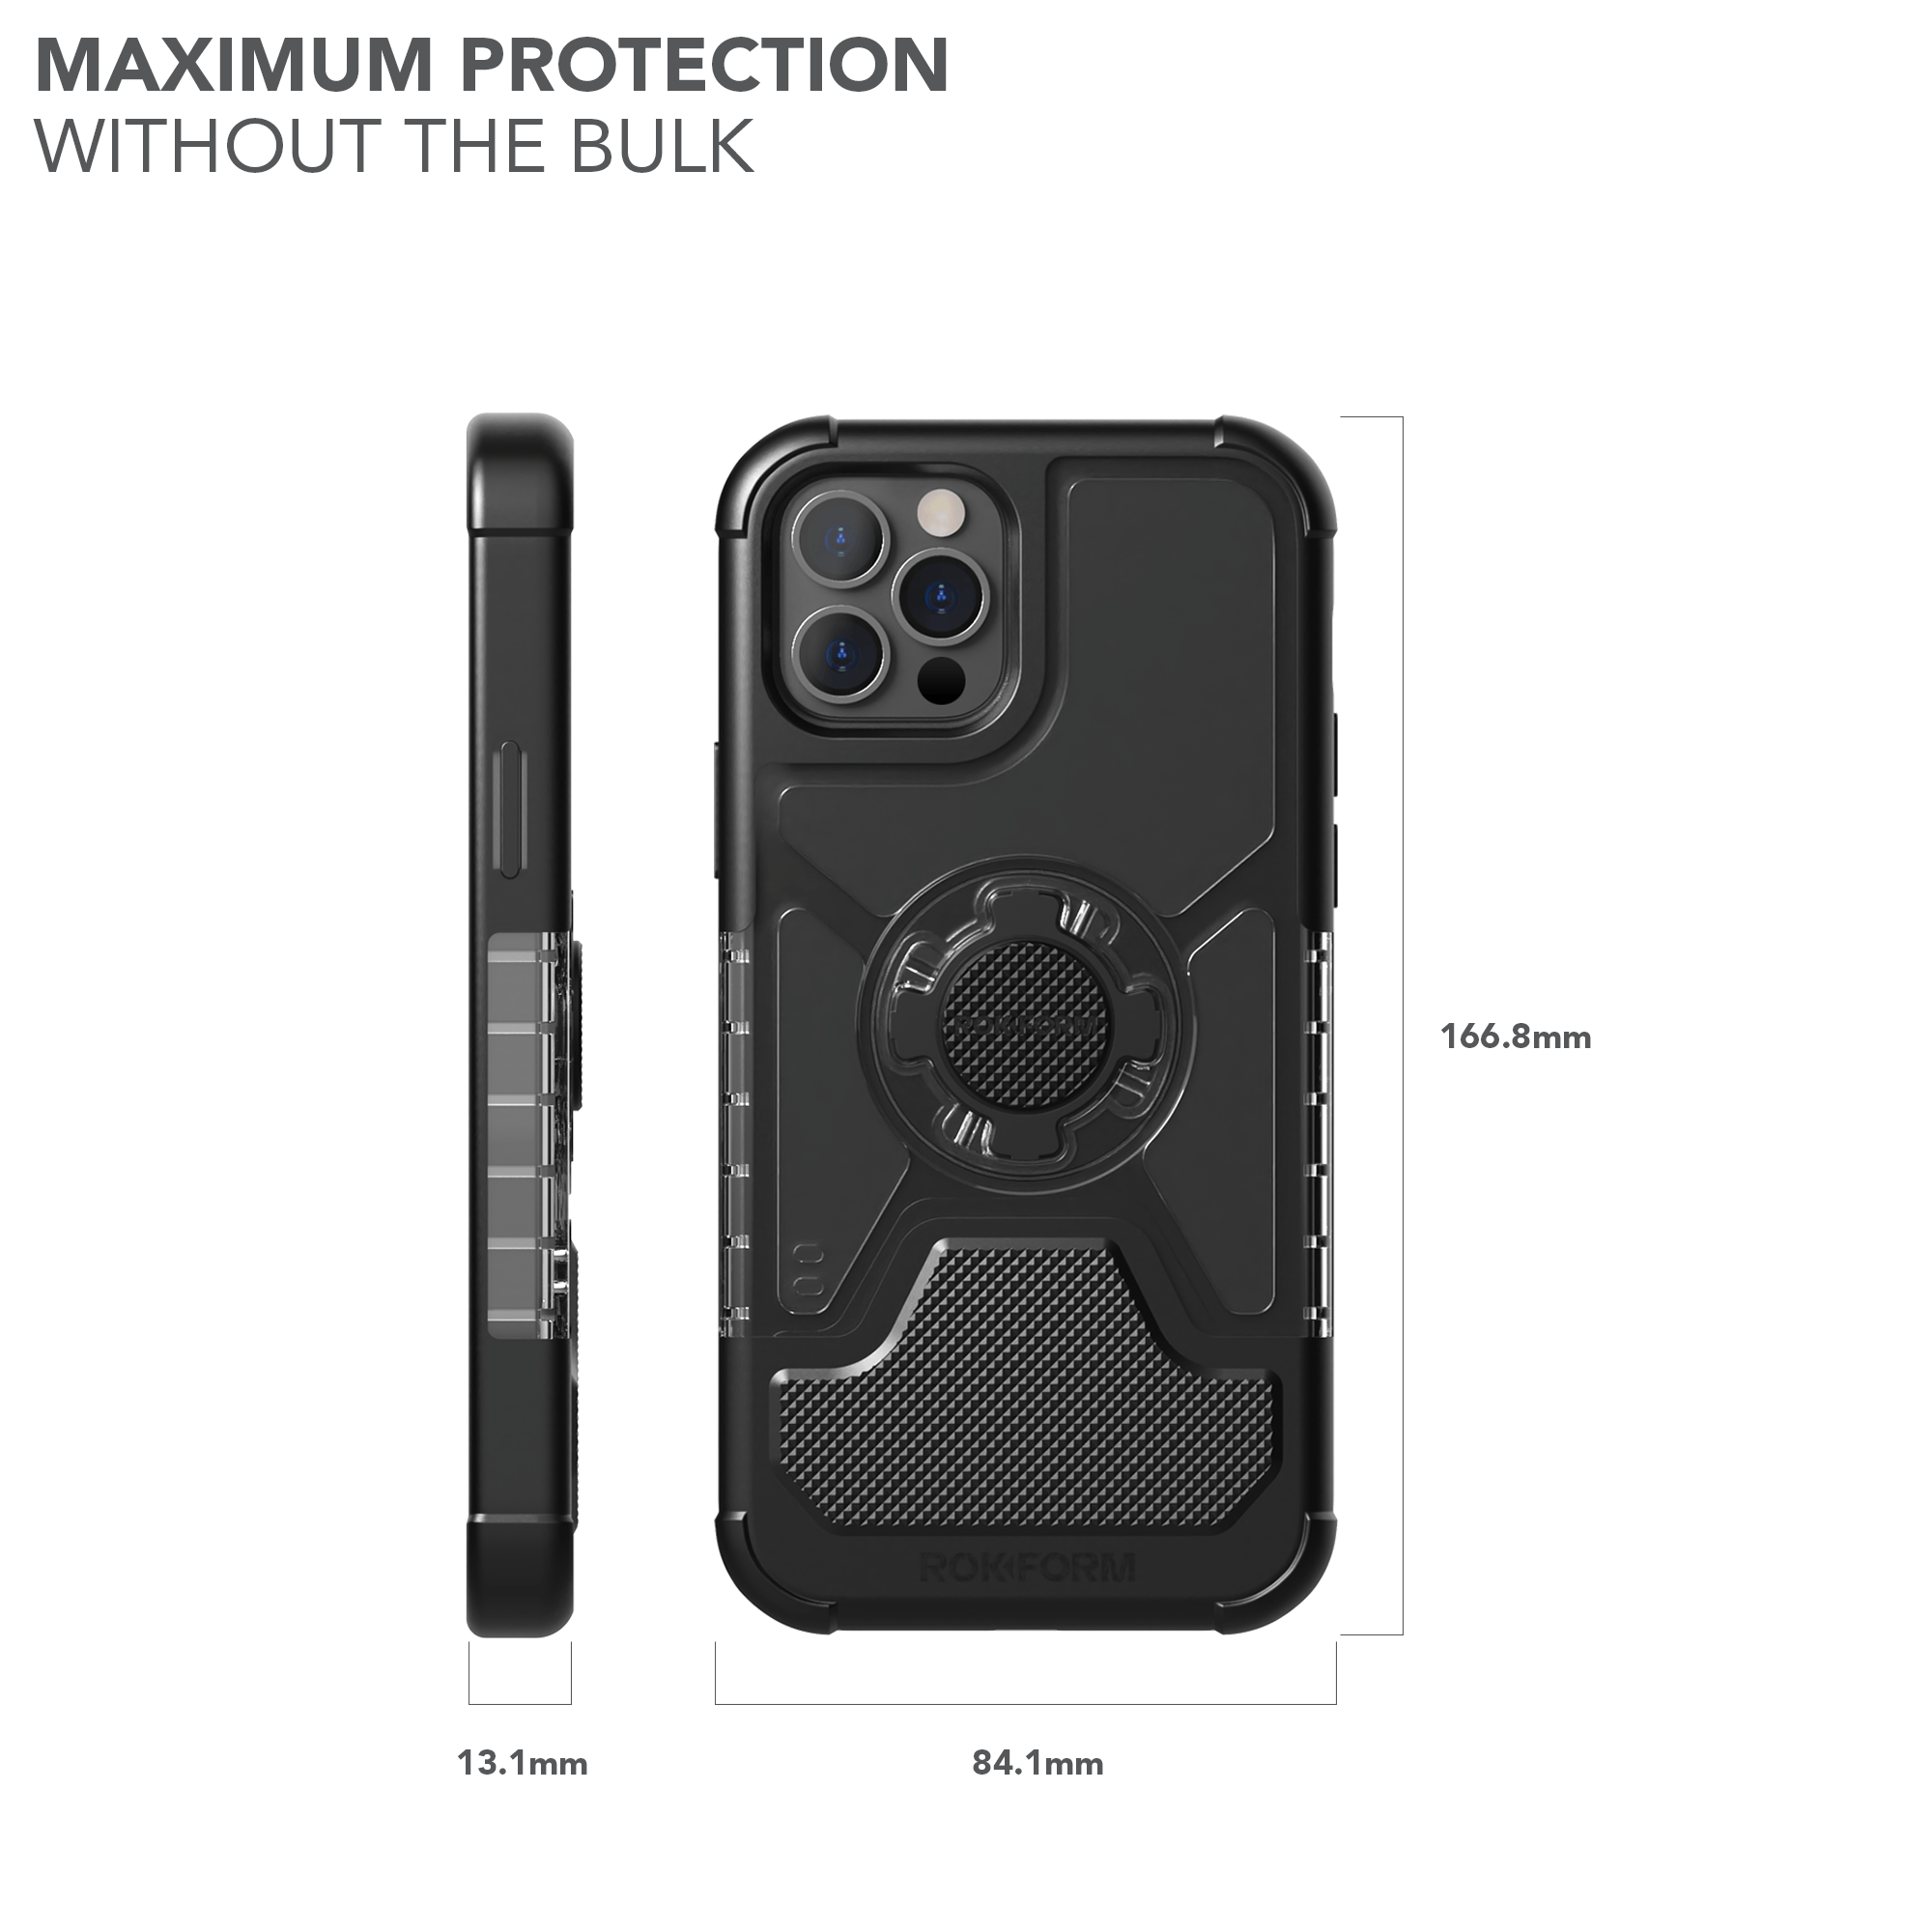 Protective iPhone 12 Pro Max Crystal Case